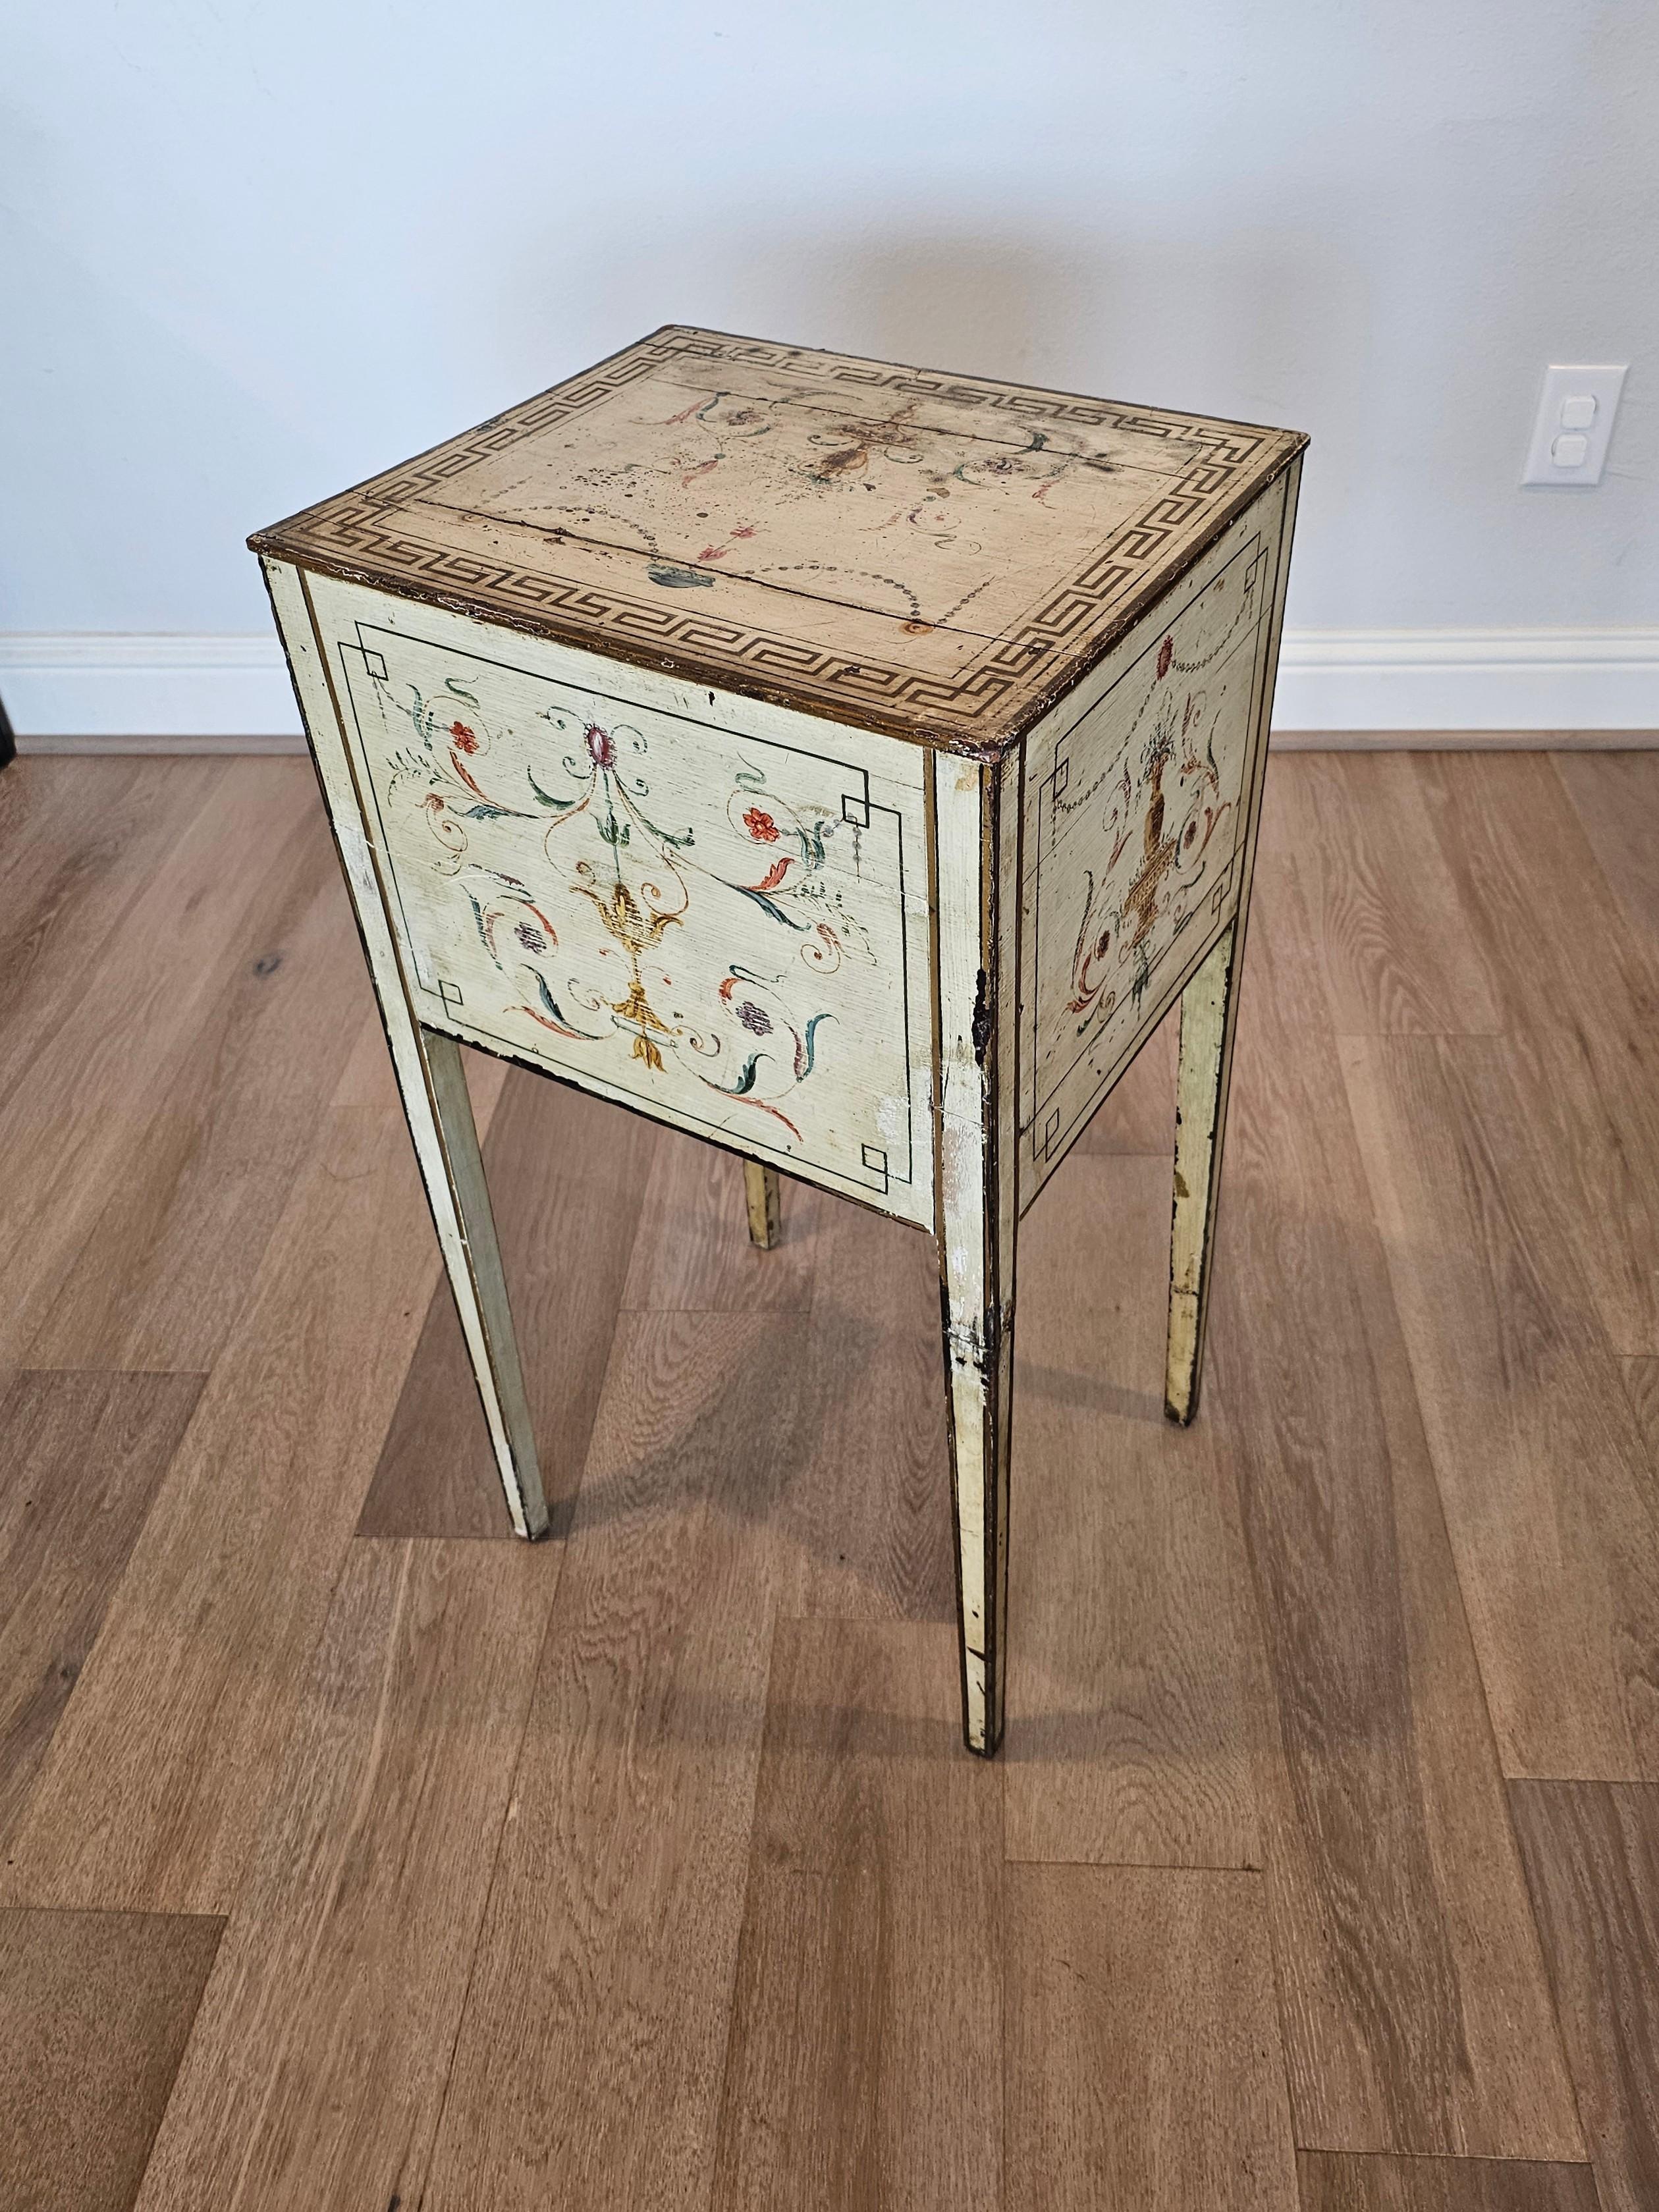 19th Century Italian Neo-classical Revival Hand-Painted Nightstand Table For Sale 3